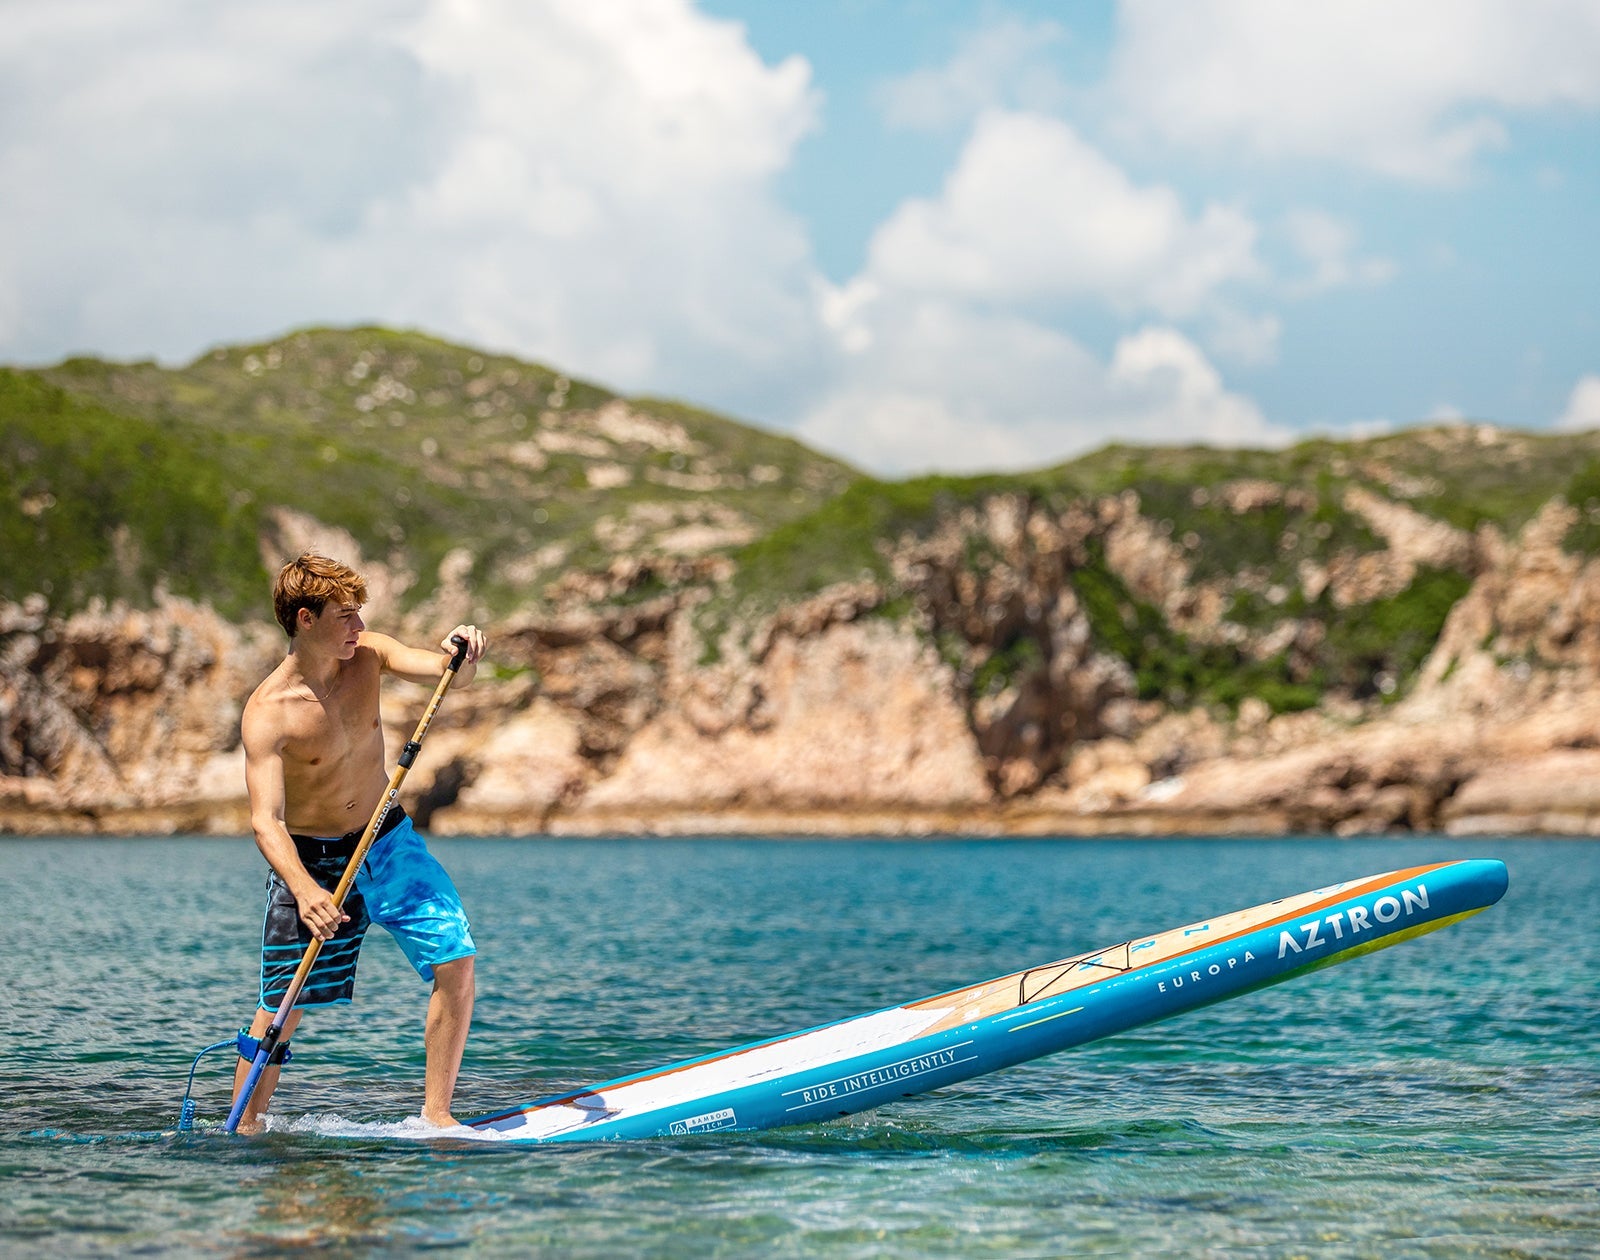 Aztron EUROPA Bamboo Touring 12'6" - Worthing Watersports - AH-630 - SUP Composite - Aztron